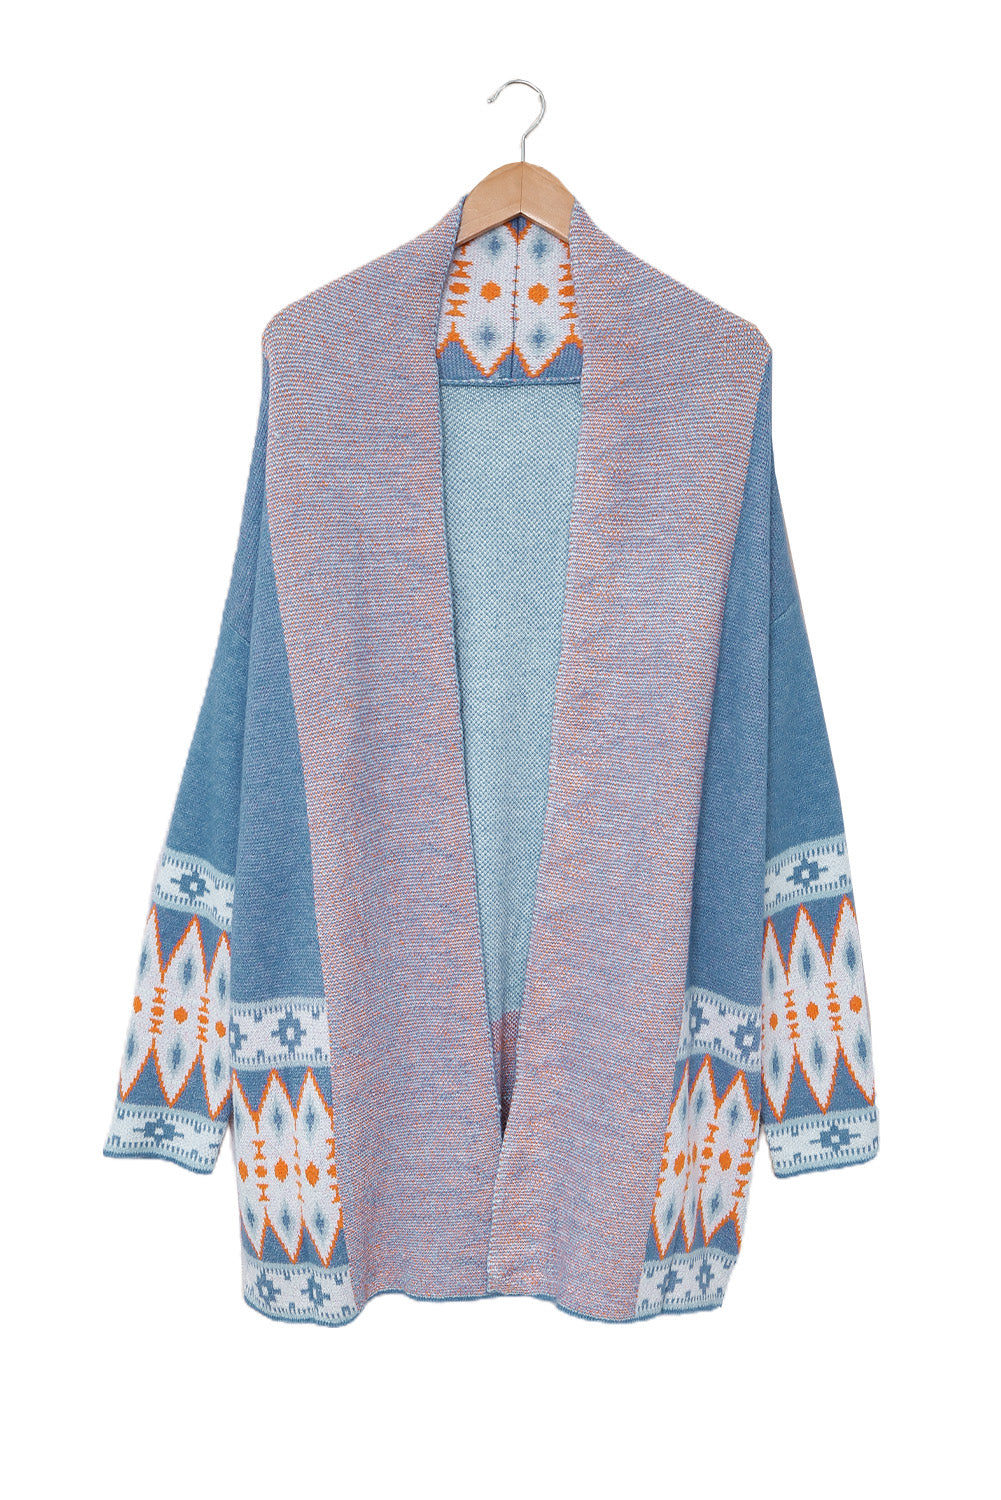 Blue Aztec Print Open Front Knitted Cardigan